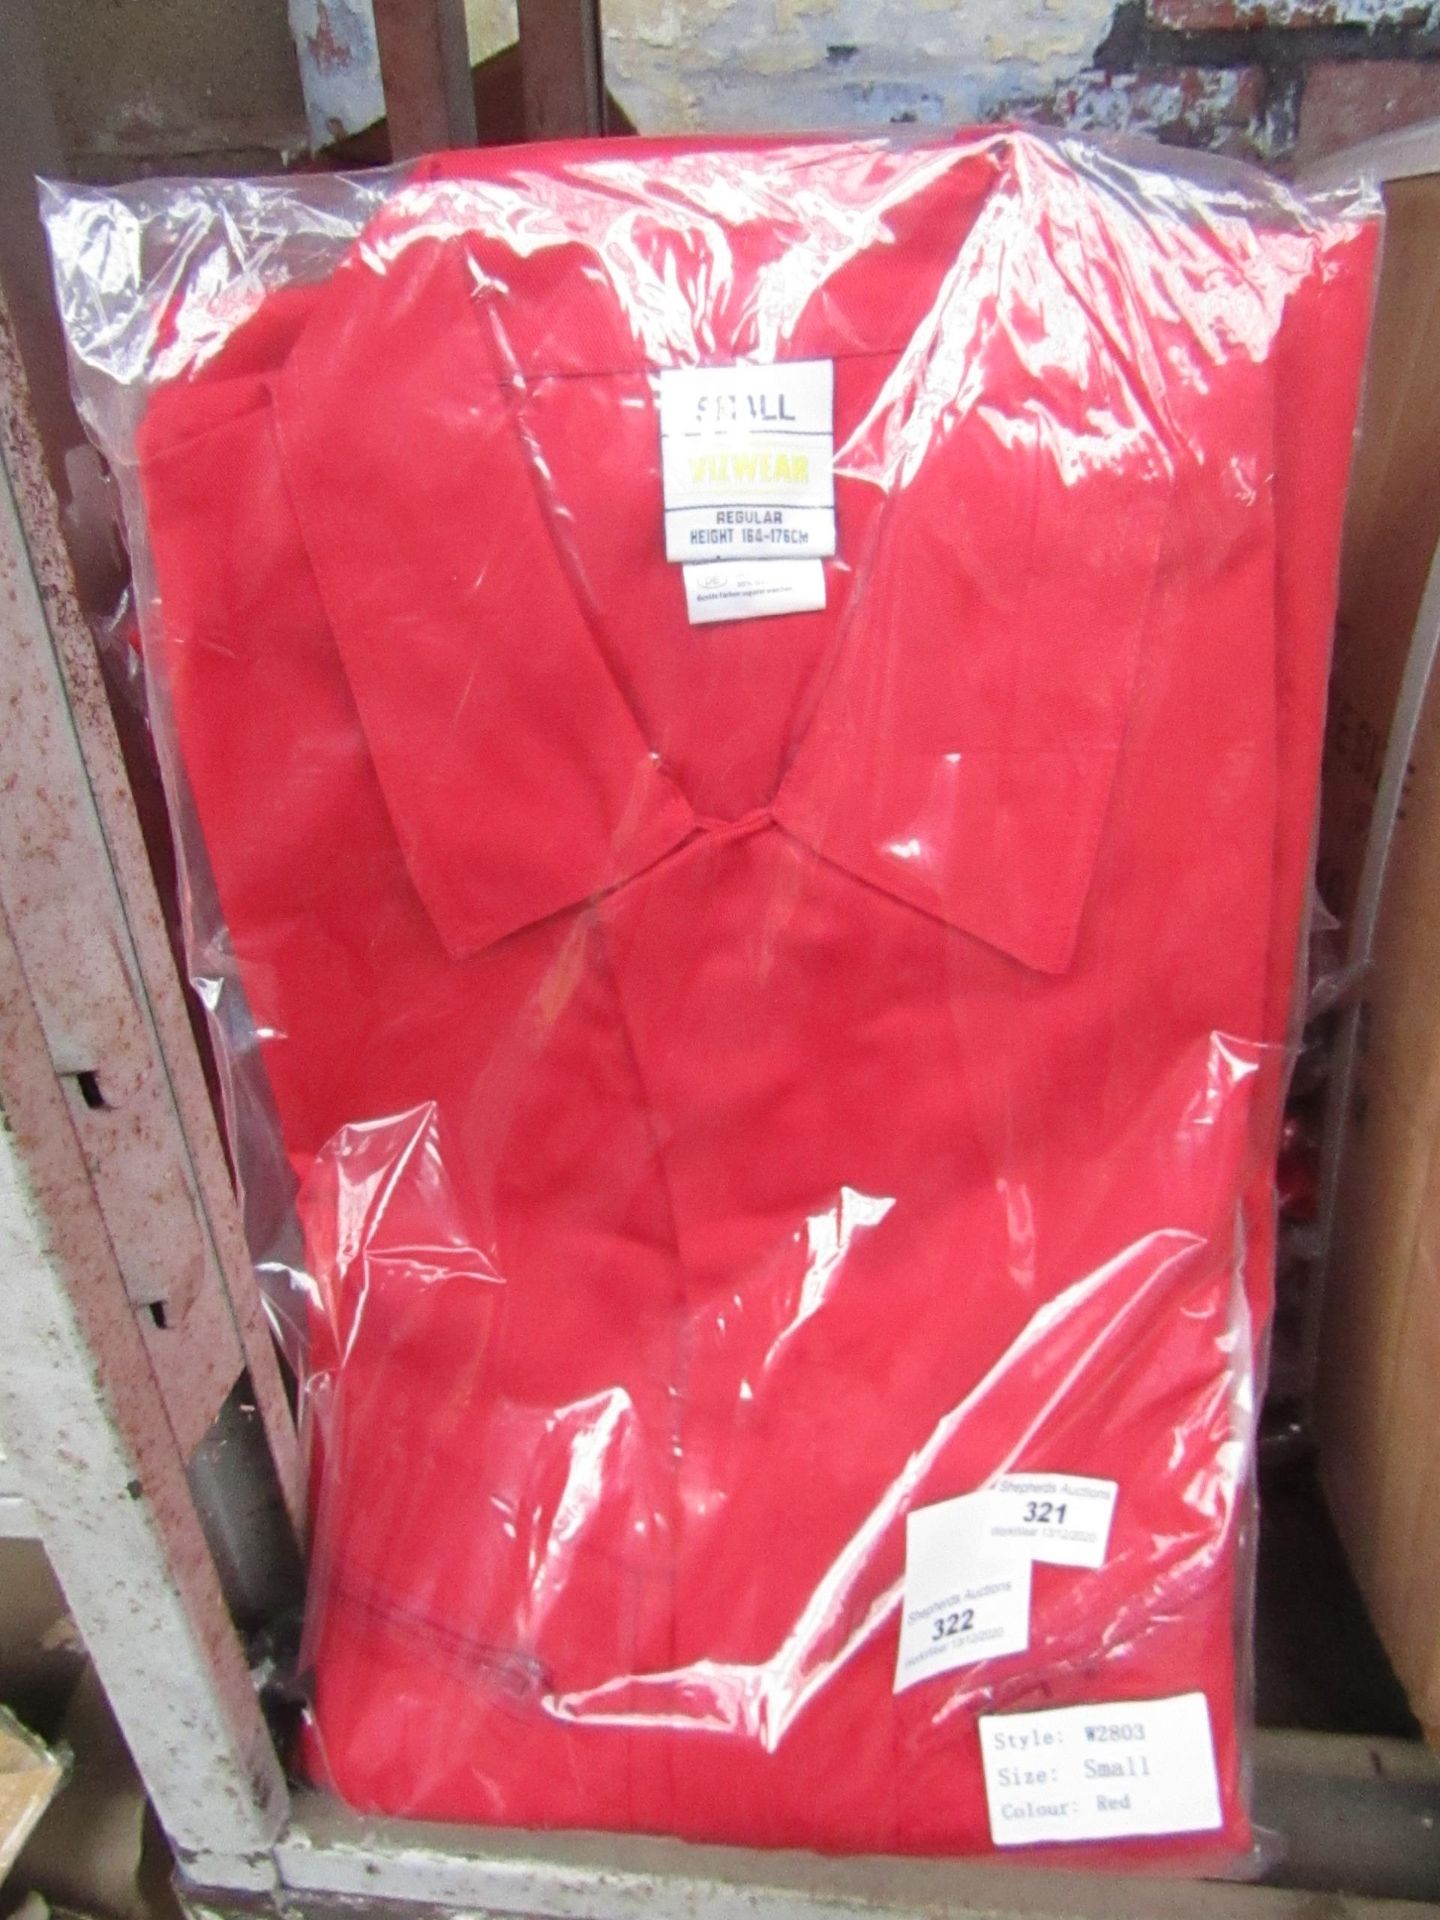 5x Black Knight - Red Boilersuit - Size Small - Unused & Packaged.